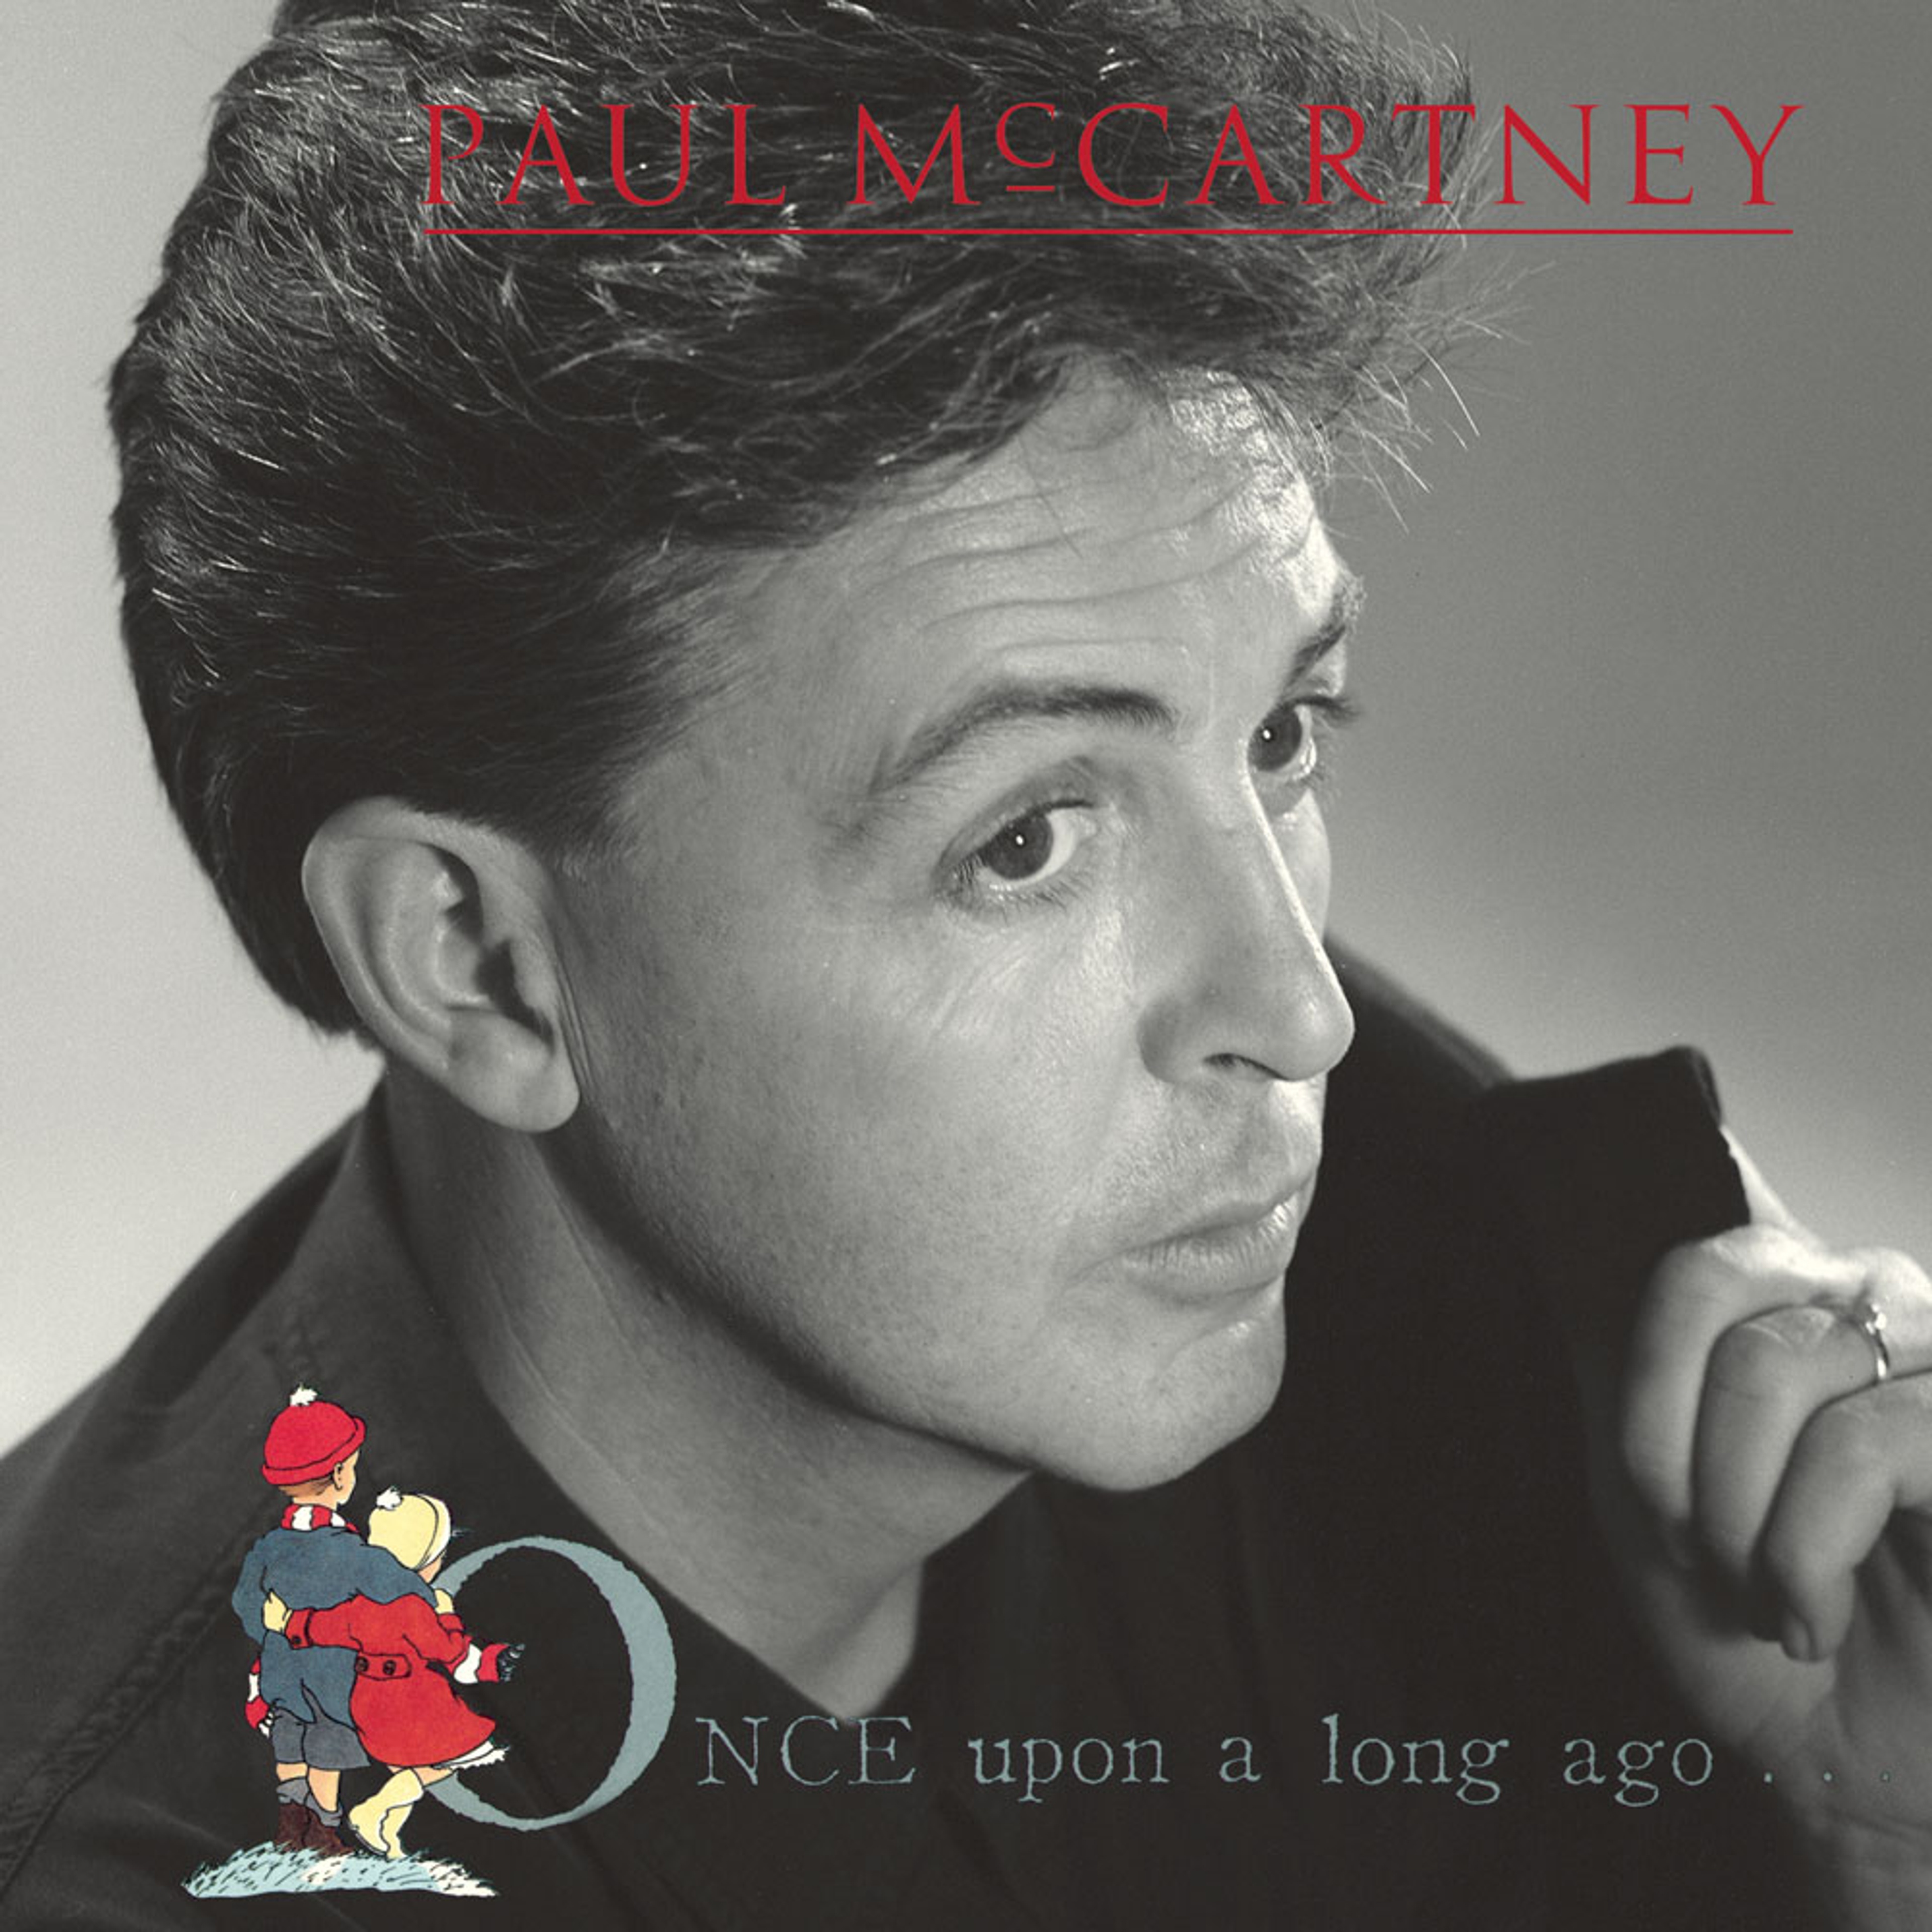 “Once Upon a Long Ago” Single artwork as featured in 'The 7" Singles Box'